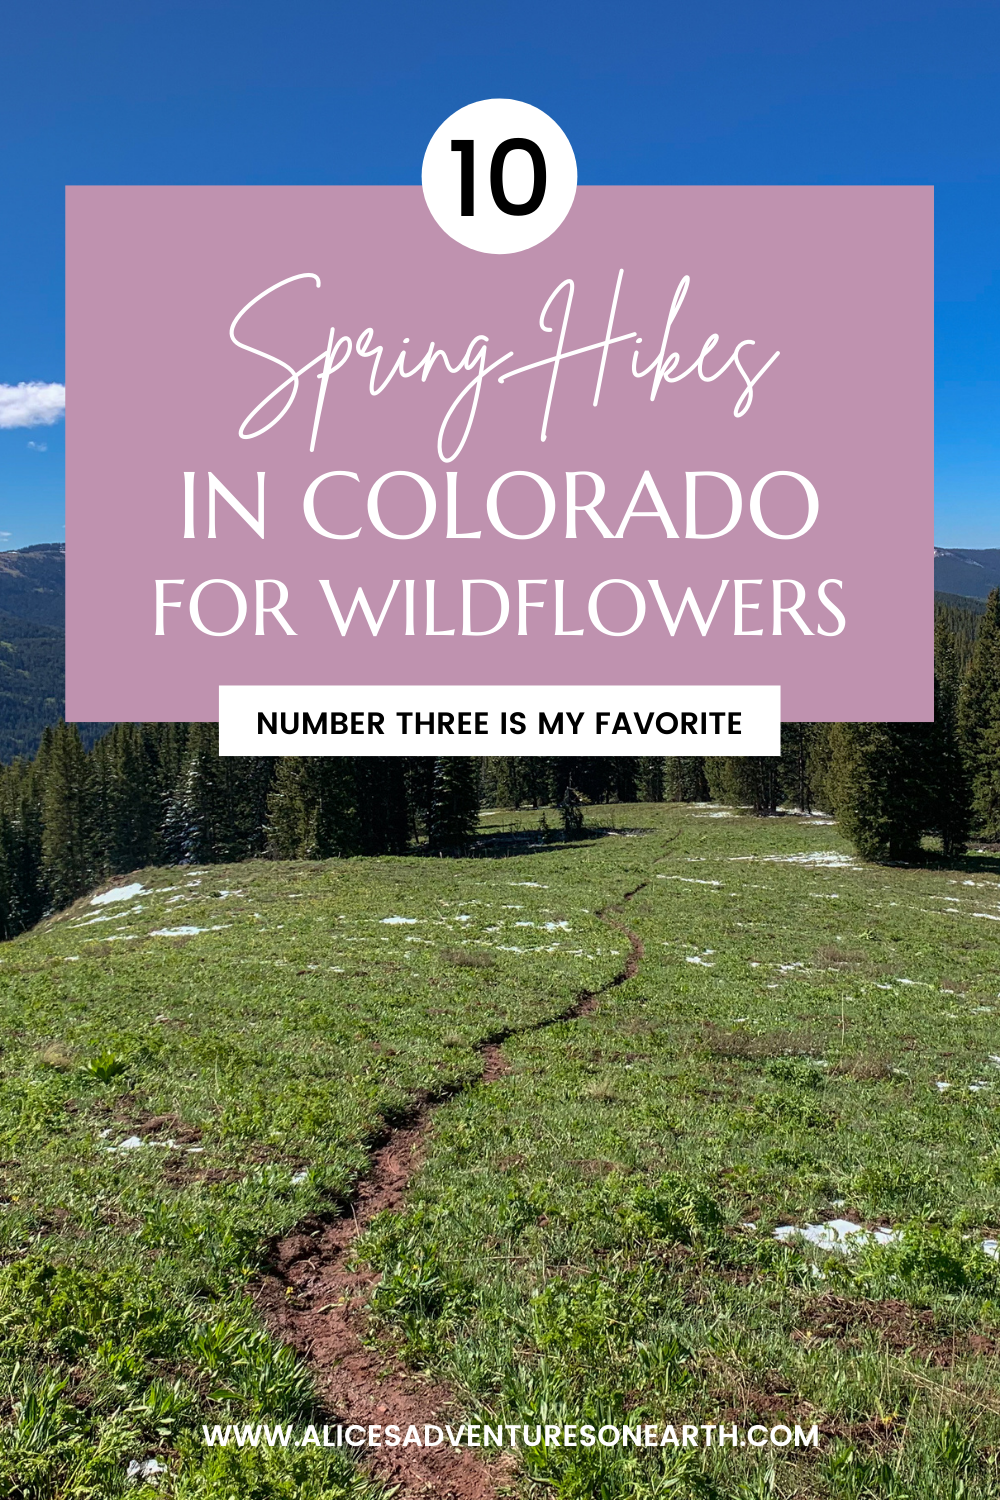 10 spring hikes in Colorado for wildflowers and views